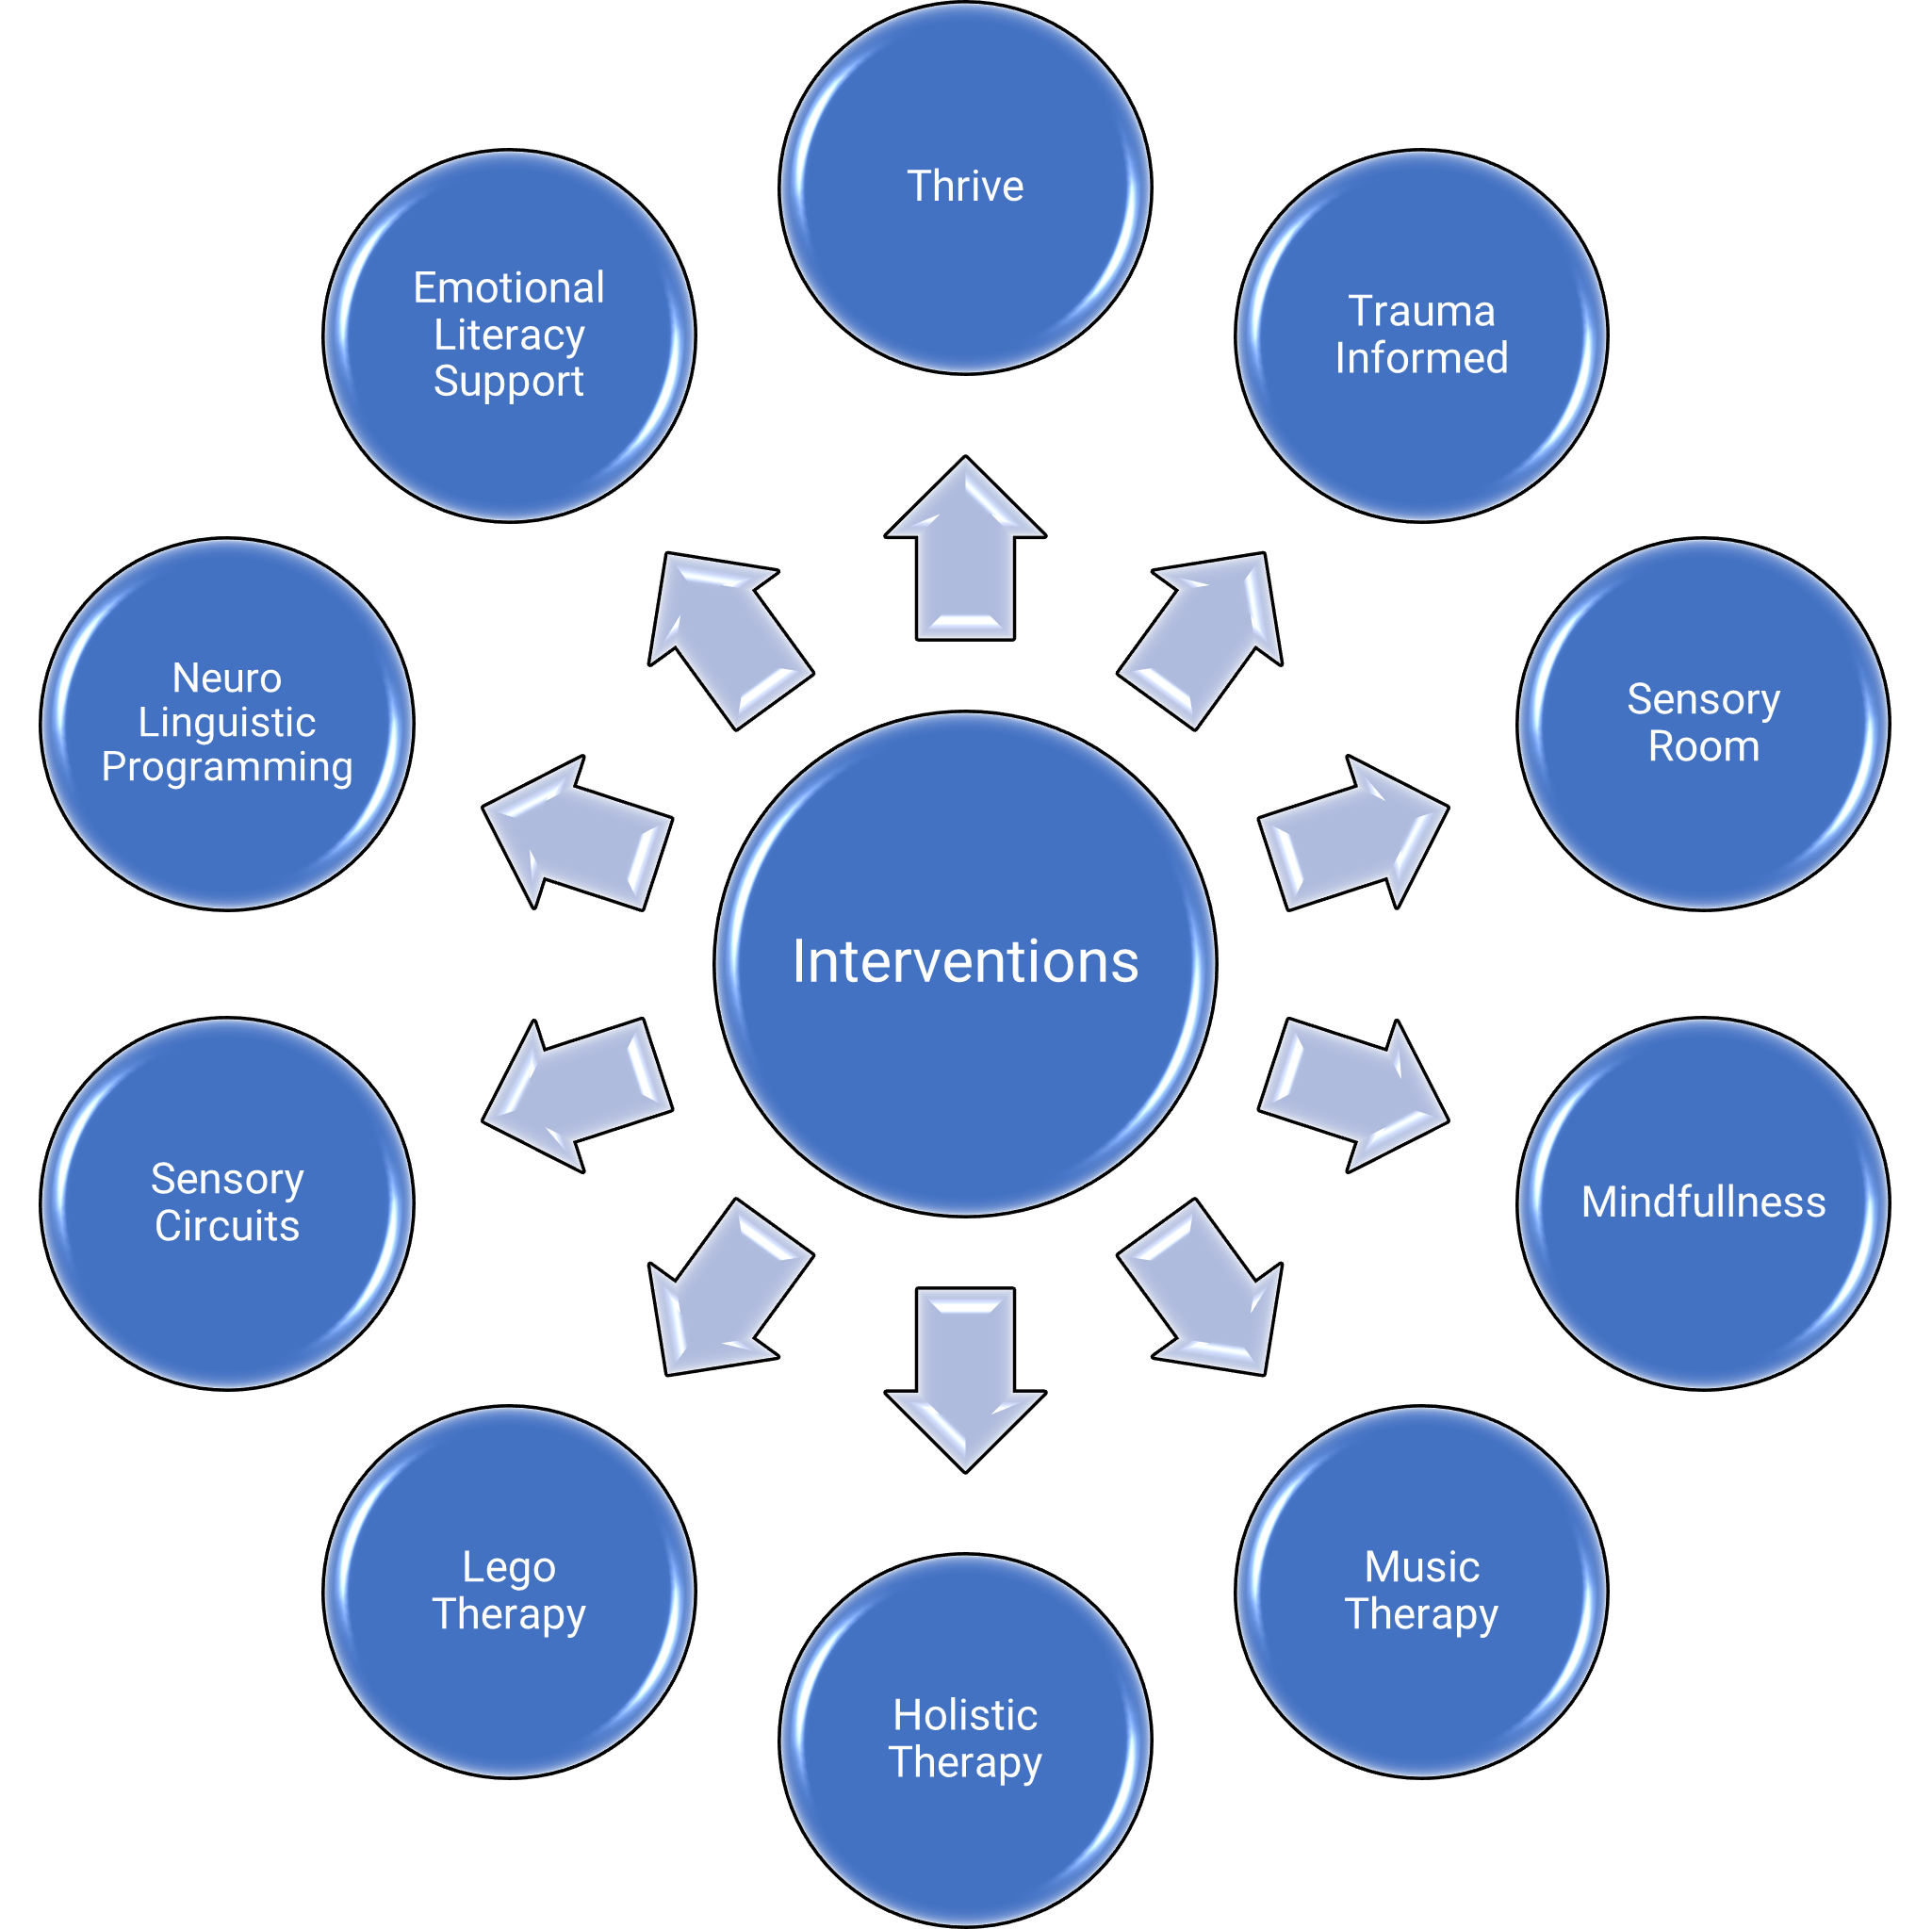 Circular flow chart demonstrating the interventions available at SBRS